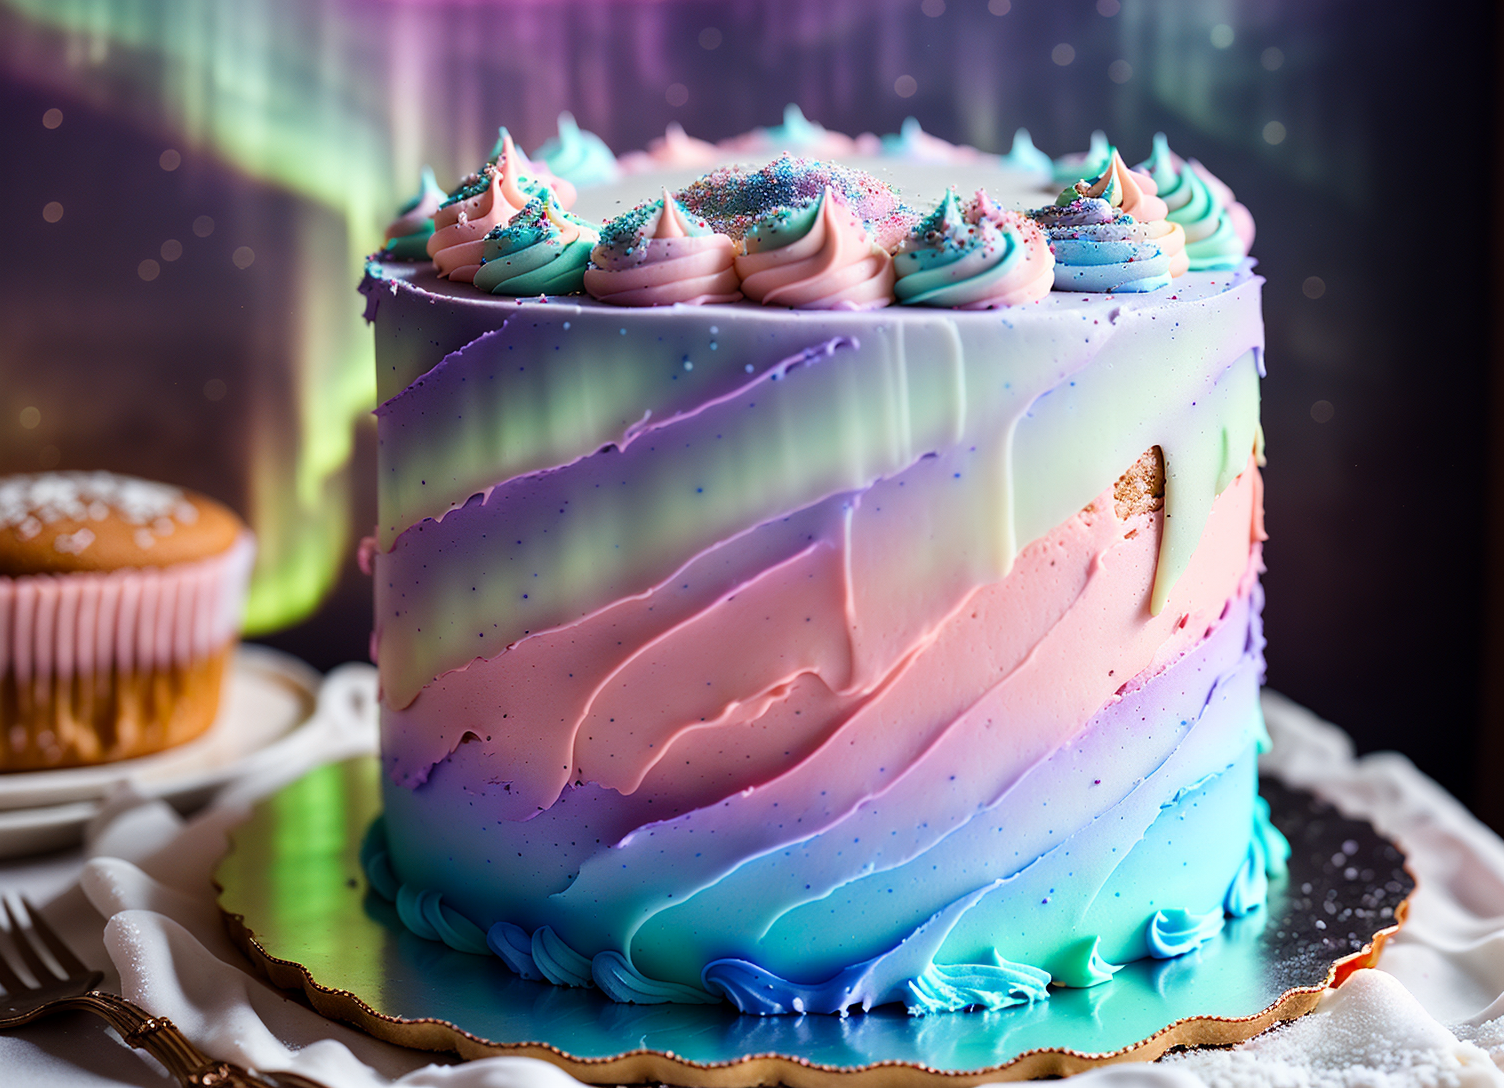 50mm f/2 (photo:1.2); an amazing gourmet (long custom aurora-themed cake covered in (frosting):1.2), (cozy modern bakery b...